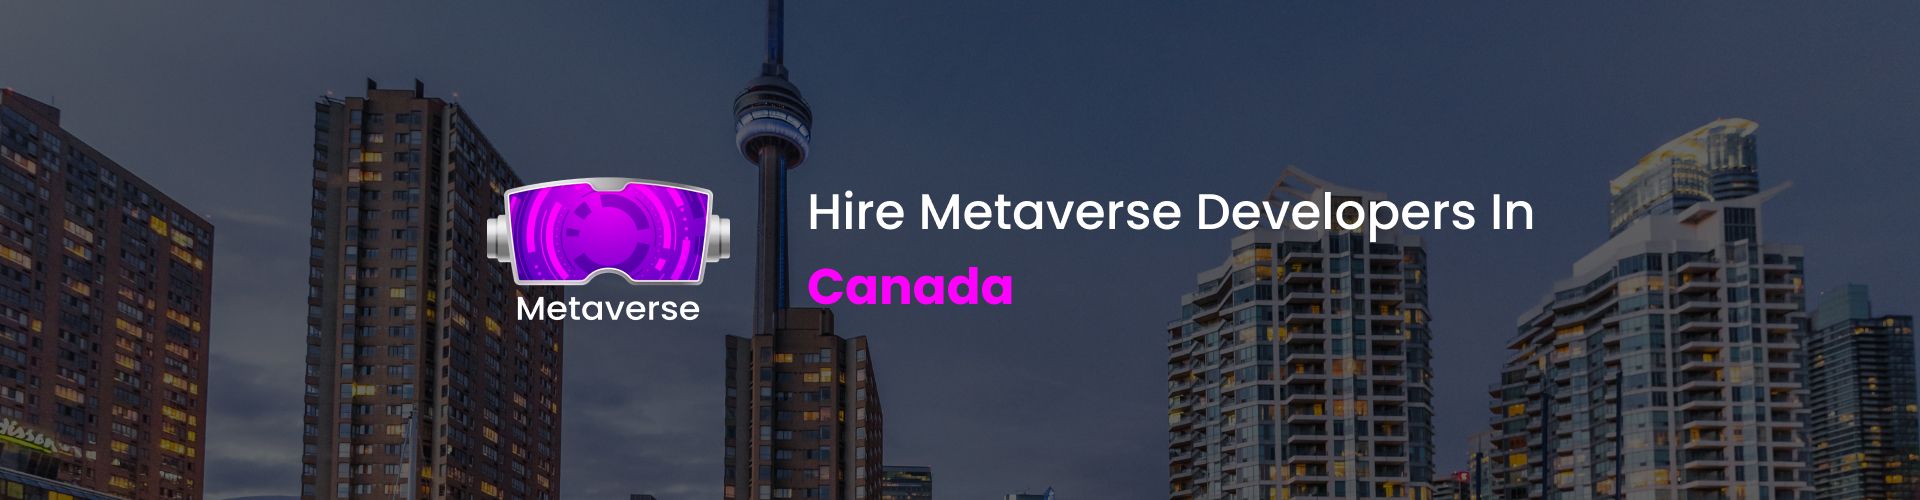 metaverse developers in canada